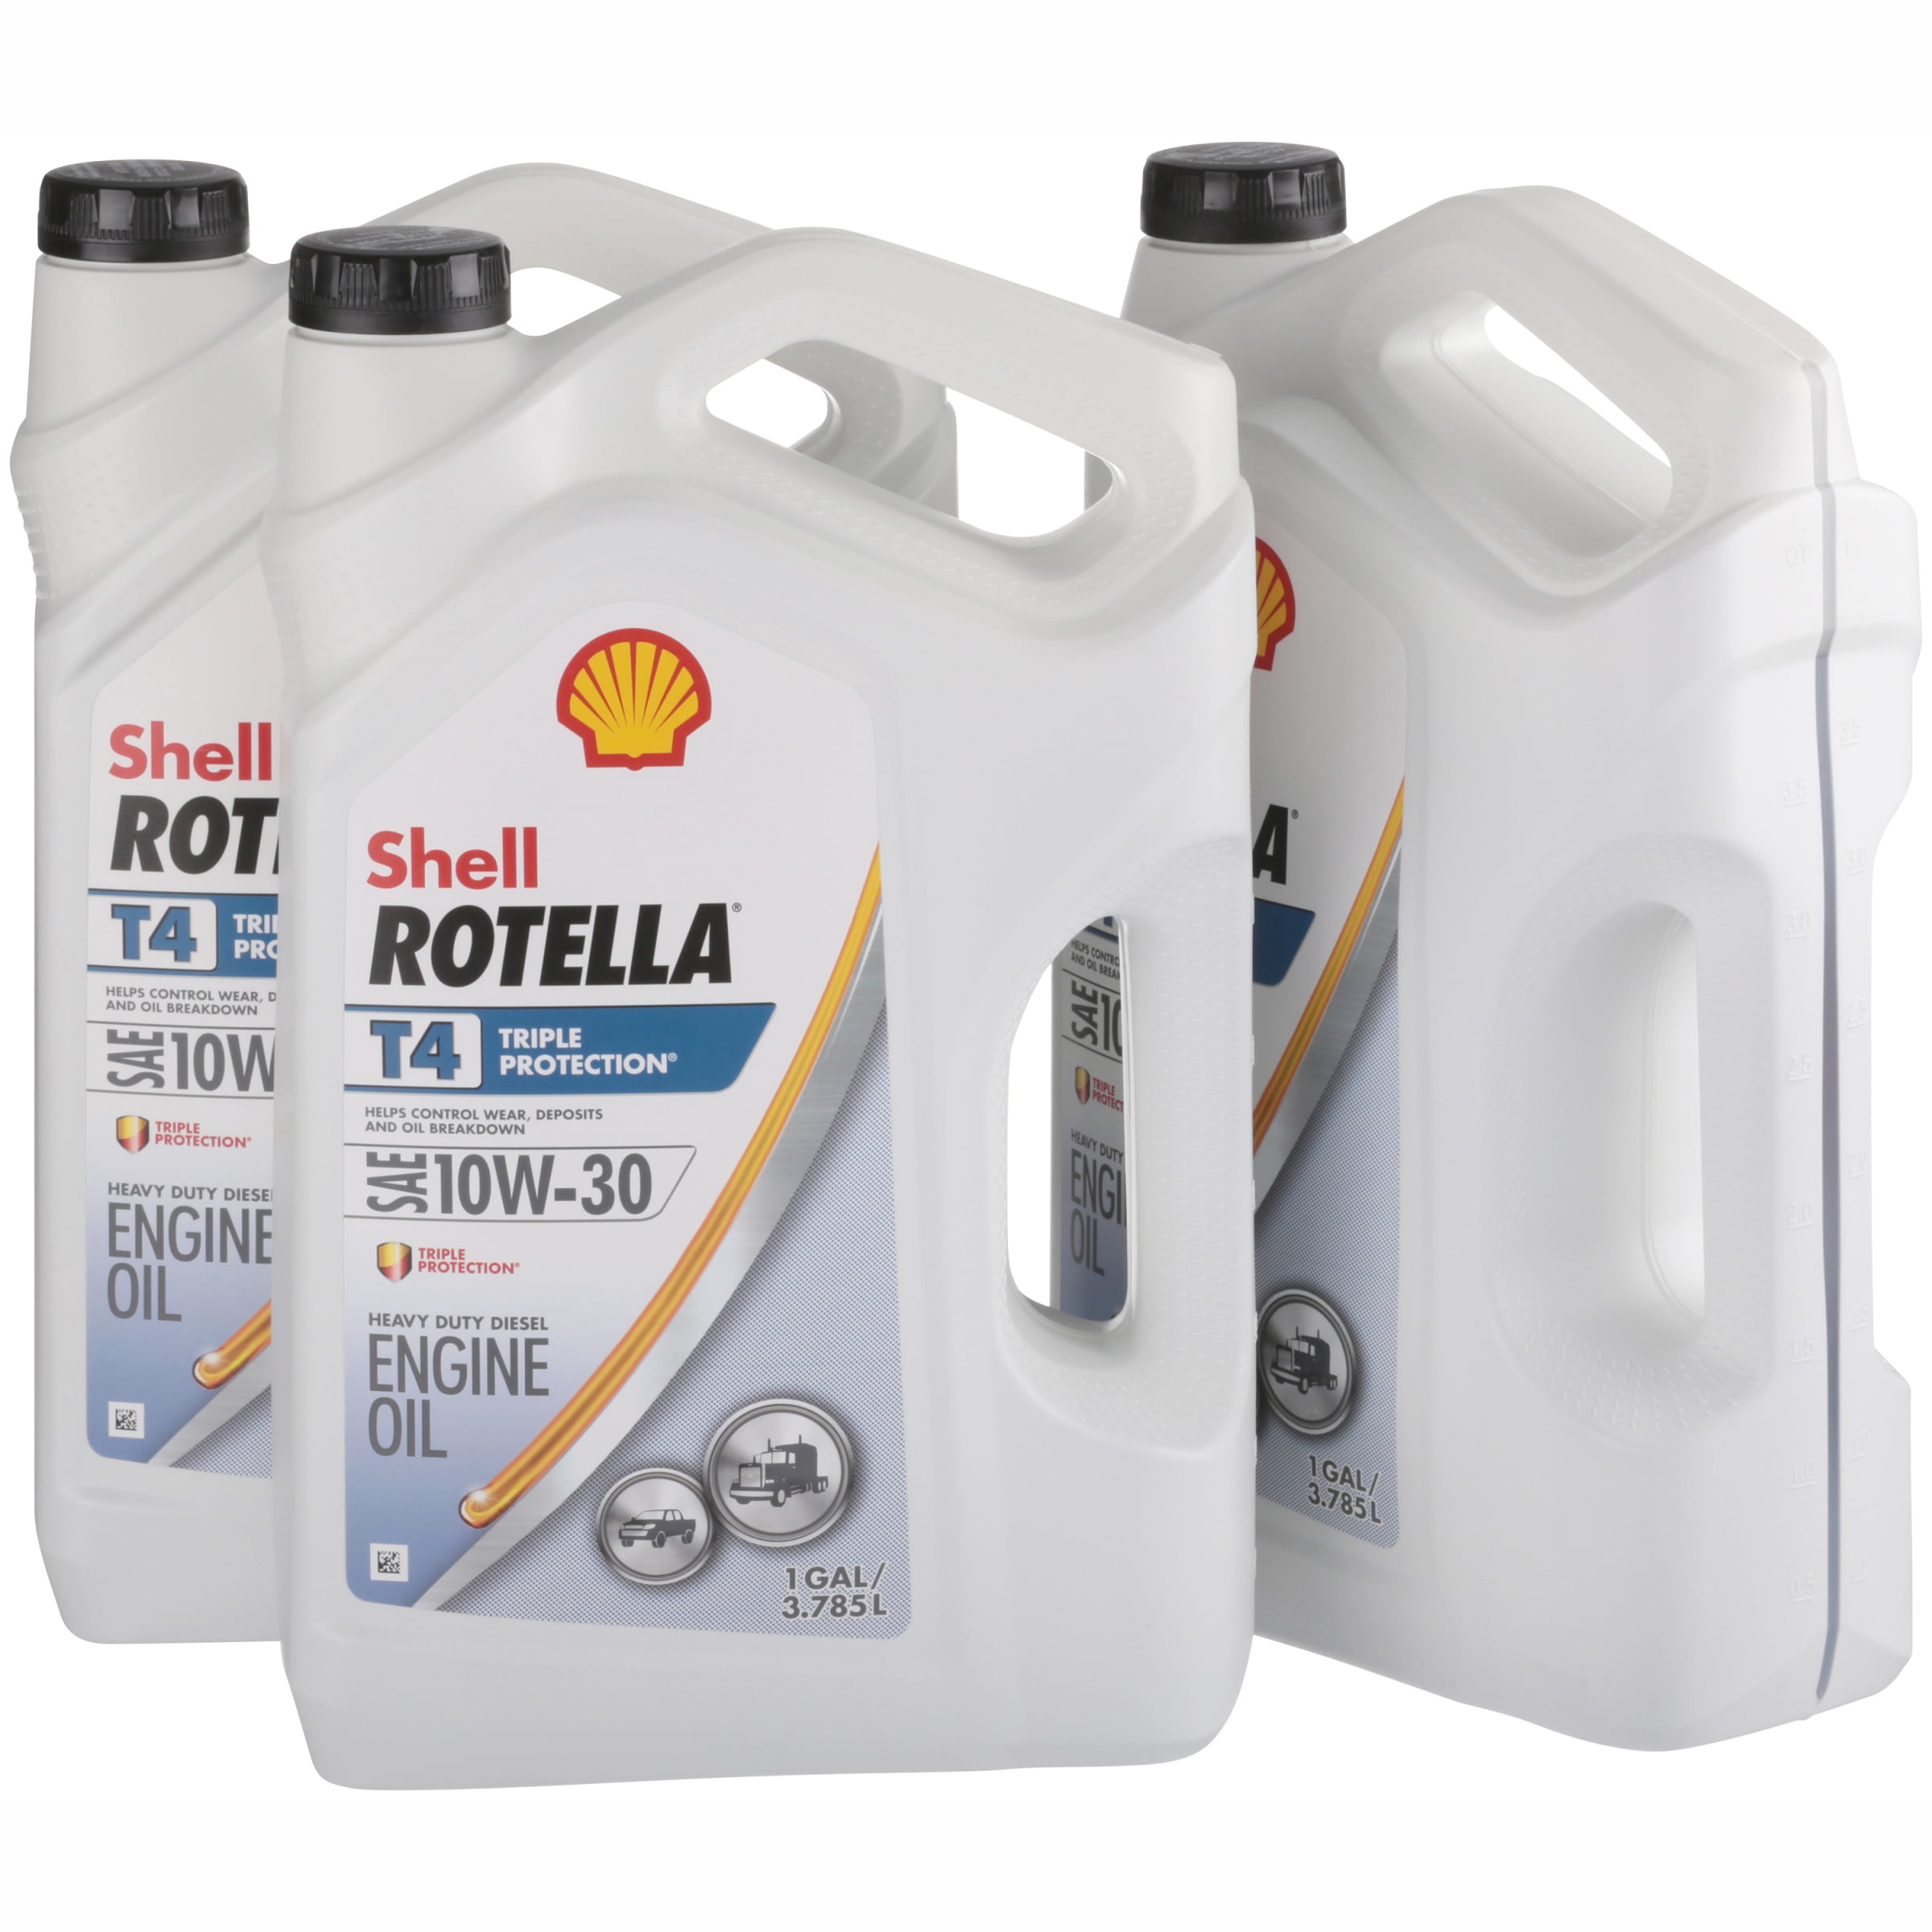 shell-rotella-t4-triple-protection-10w-30-diesel-motor-oil-1-gallon-3